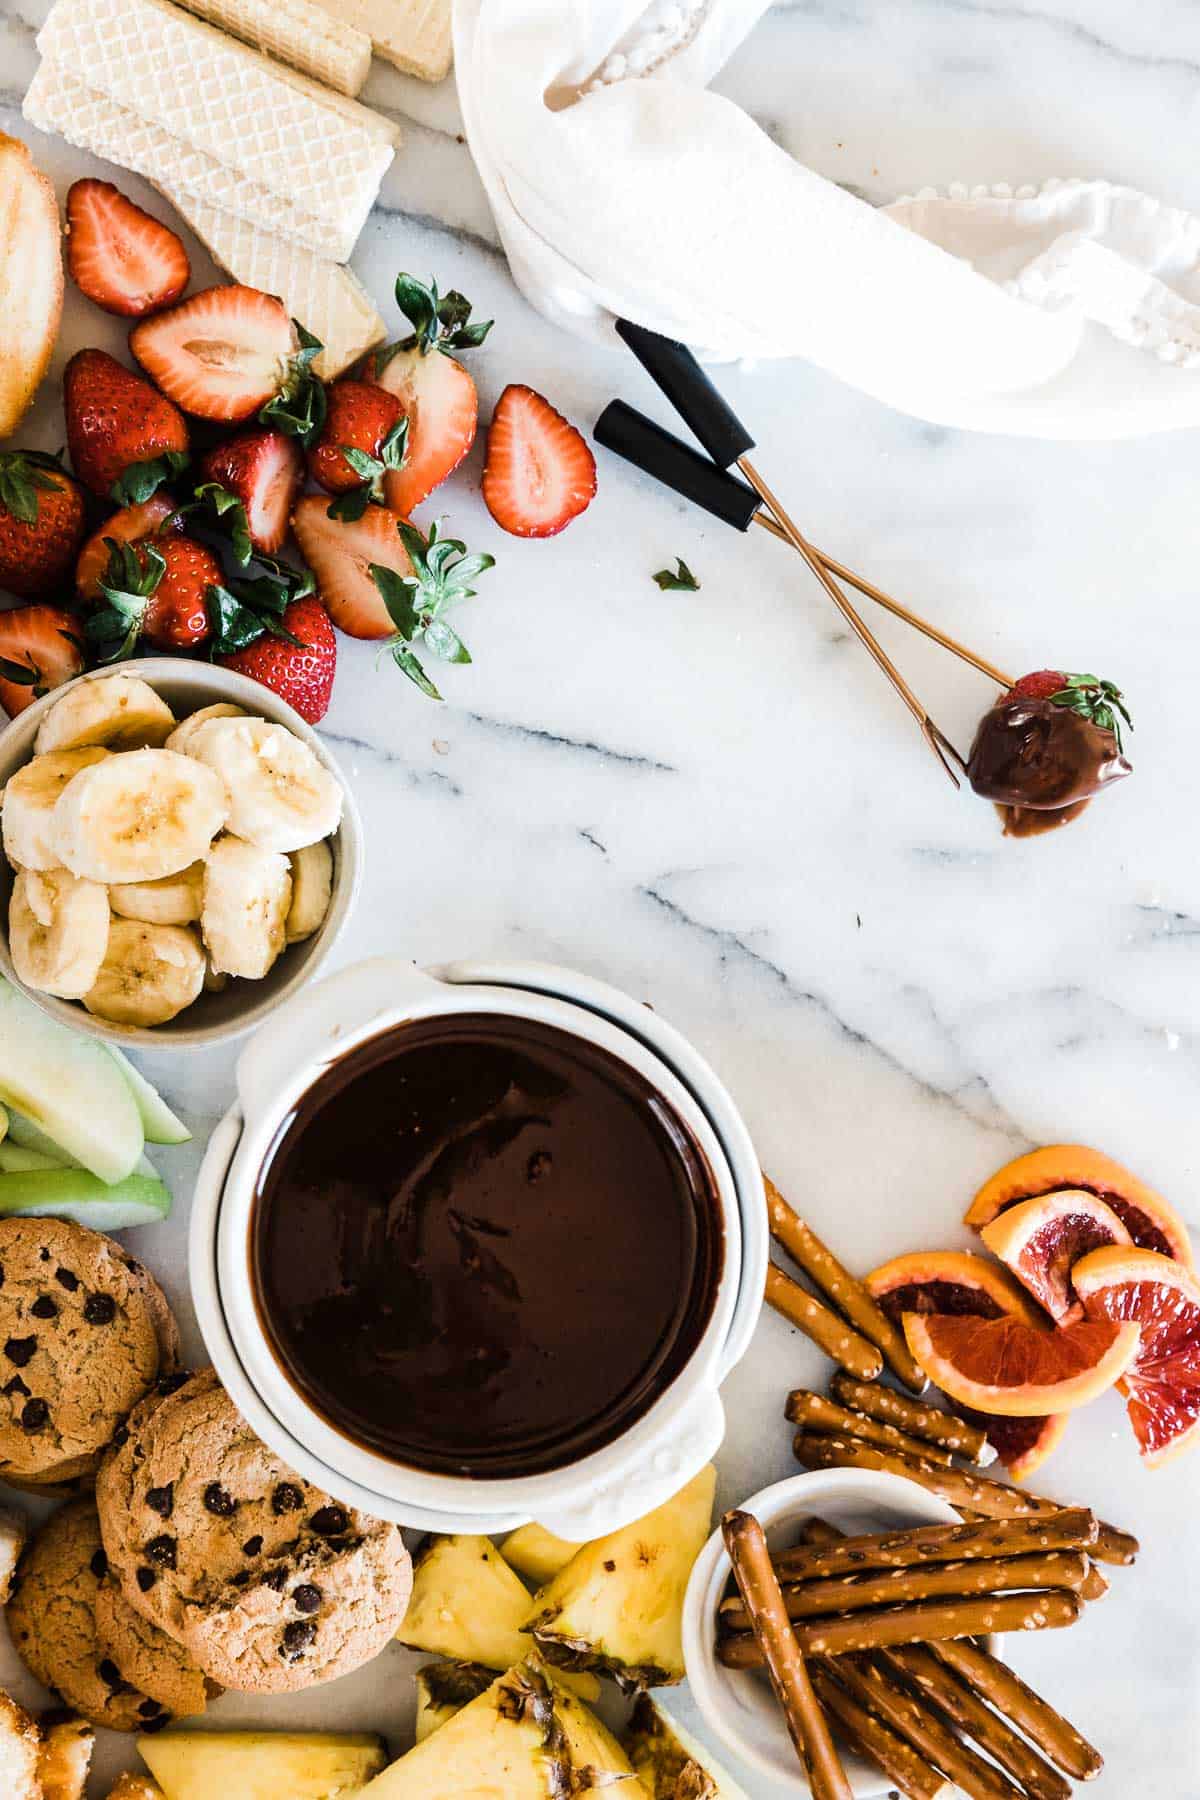 Chocolate fondue in a white dish surrounded by dippers.